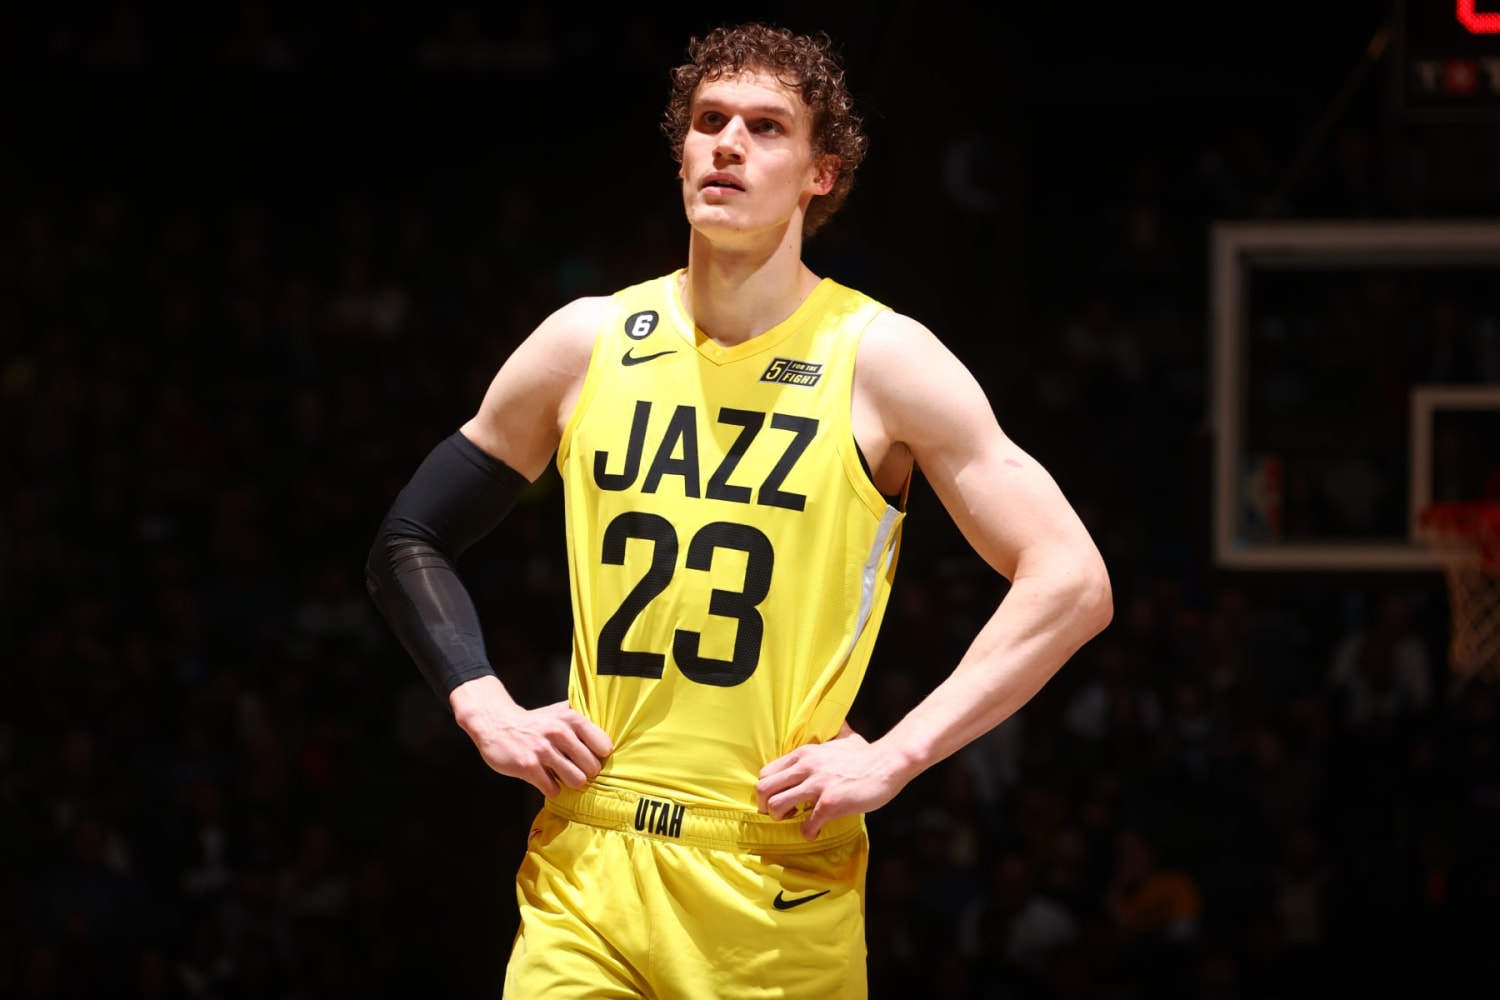 Lauri Markkanen TOOK OVER in Jazz's win over Suns 38 PTS & 6 REB